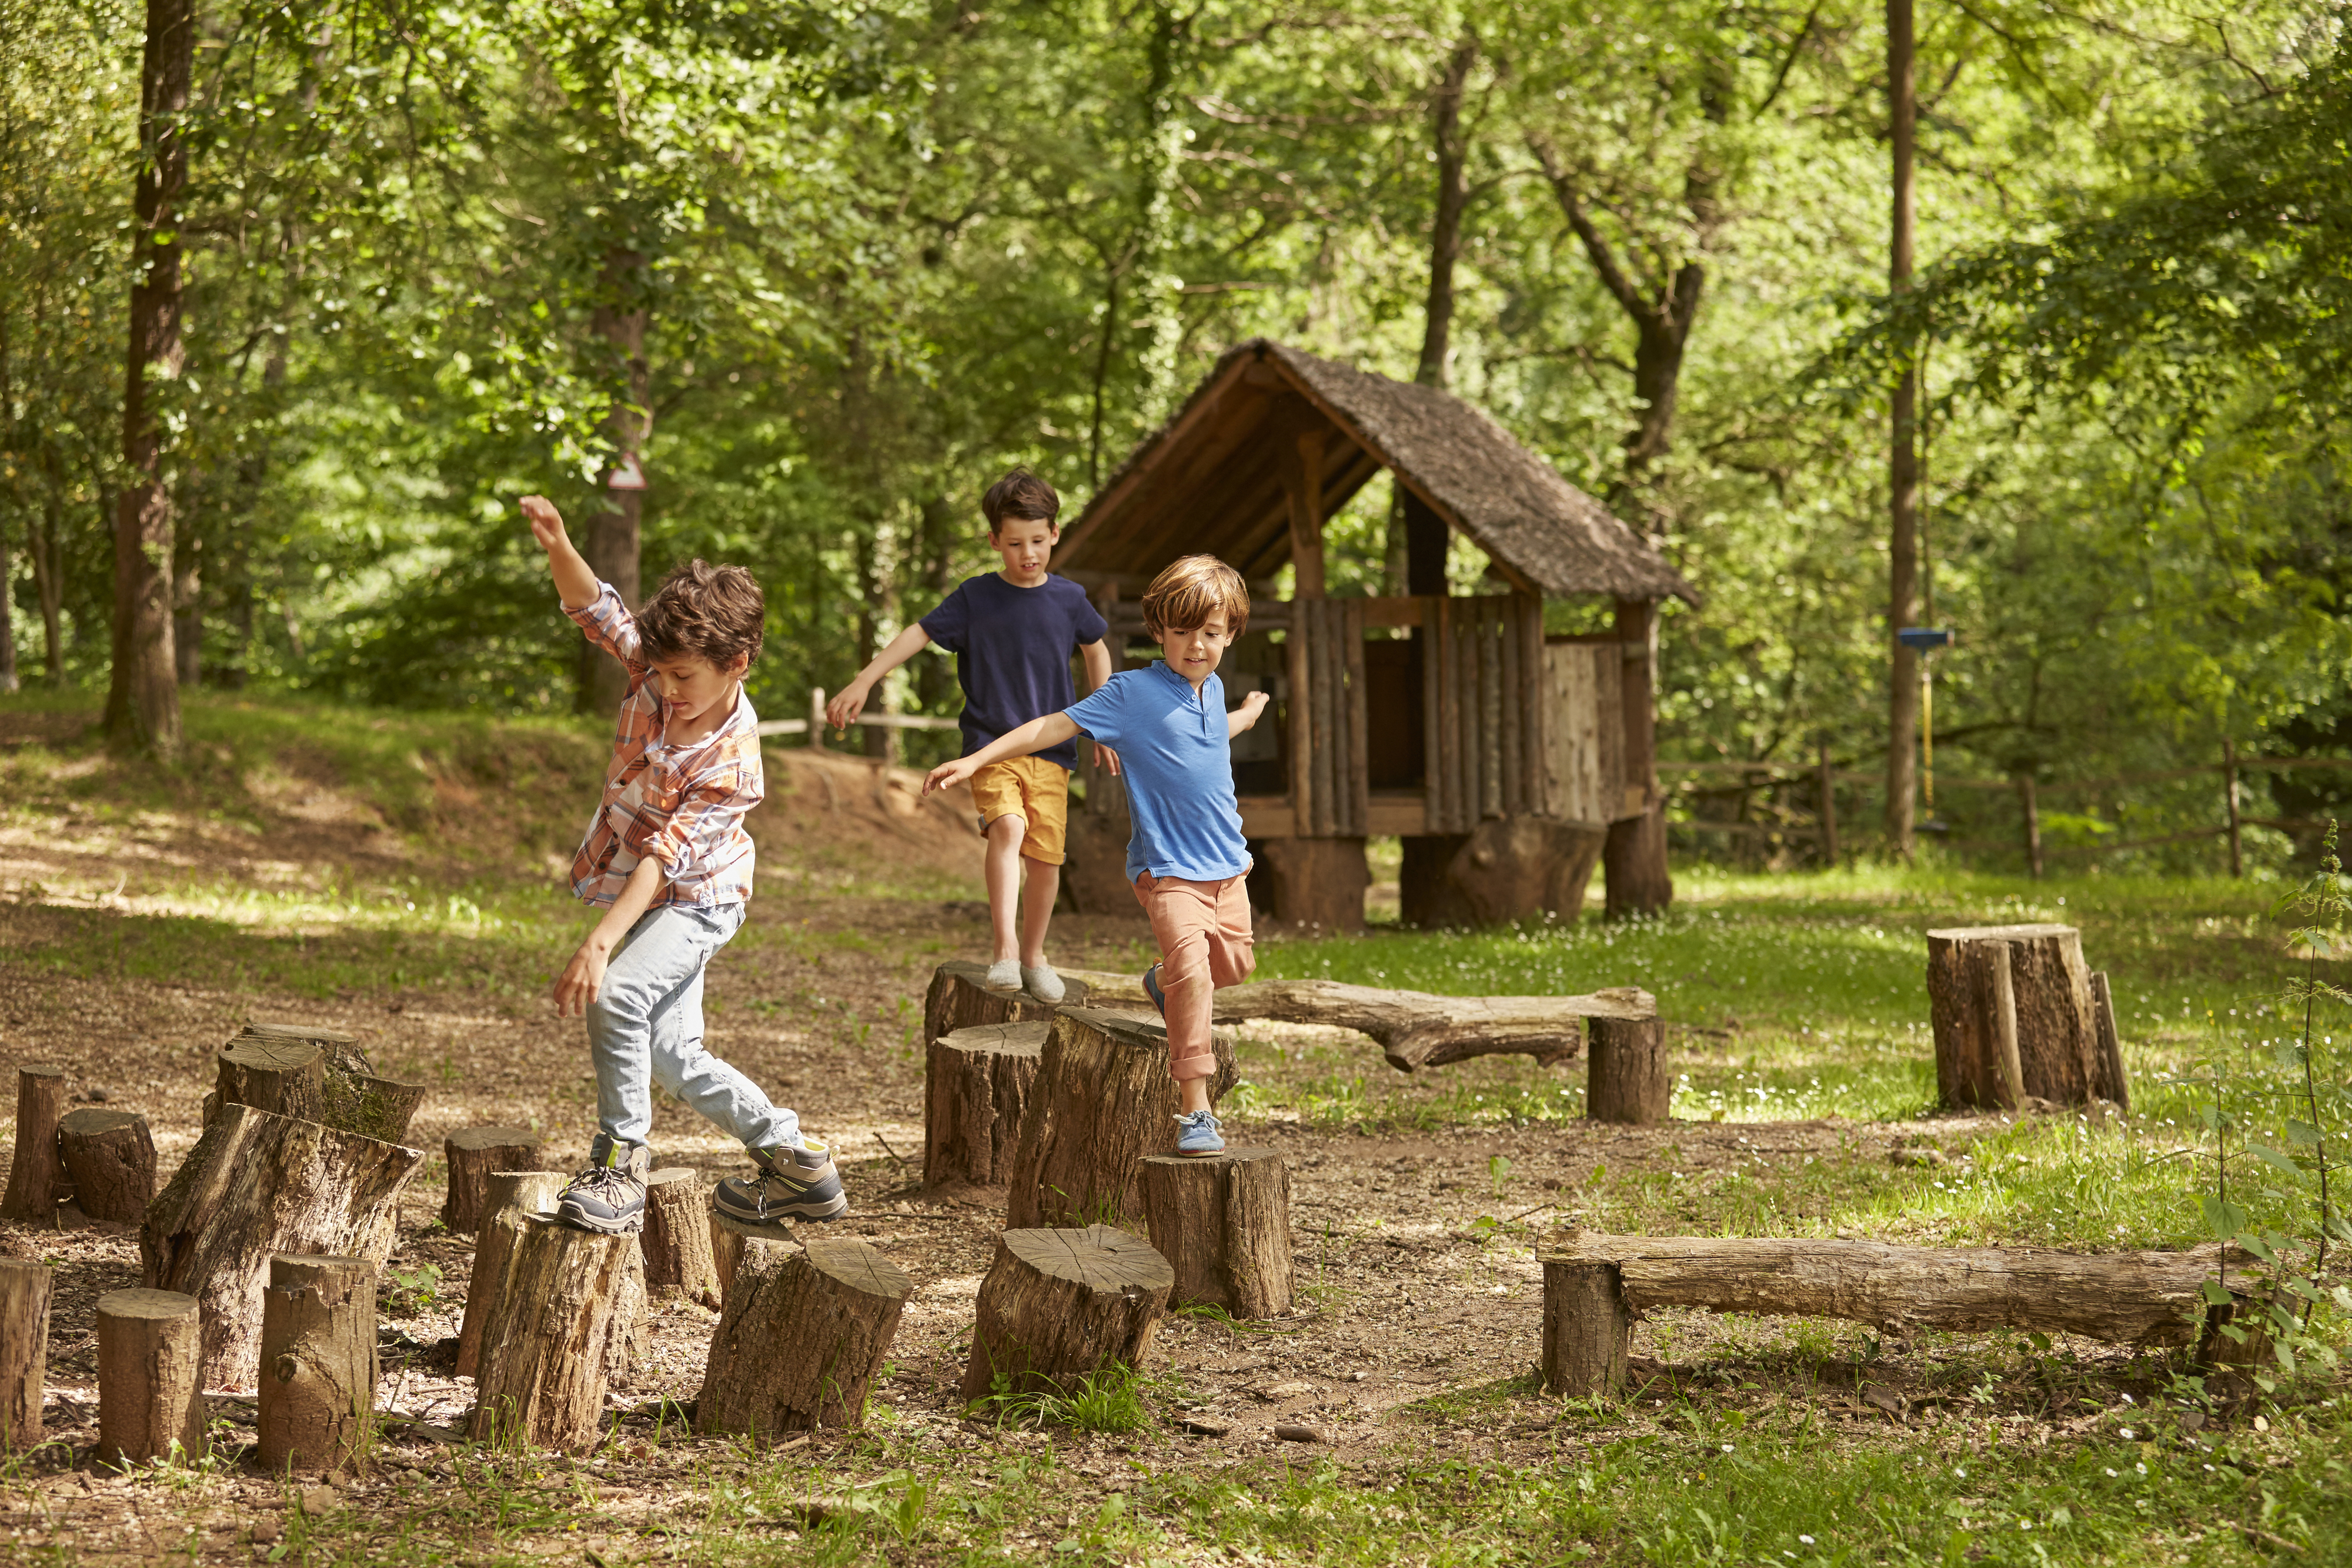 Three boys playing in a wooded area